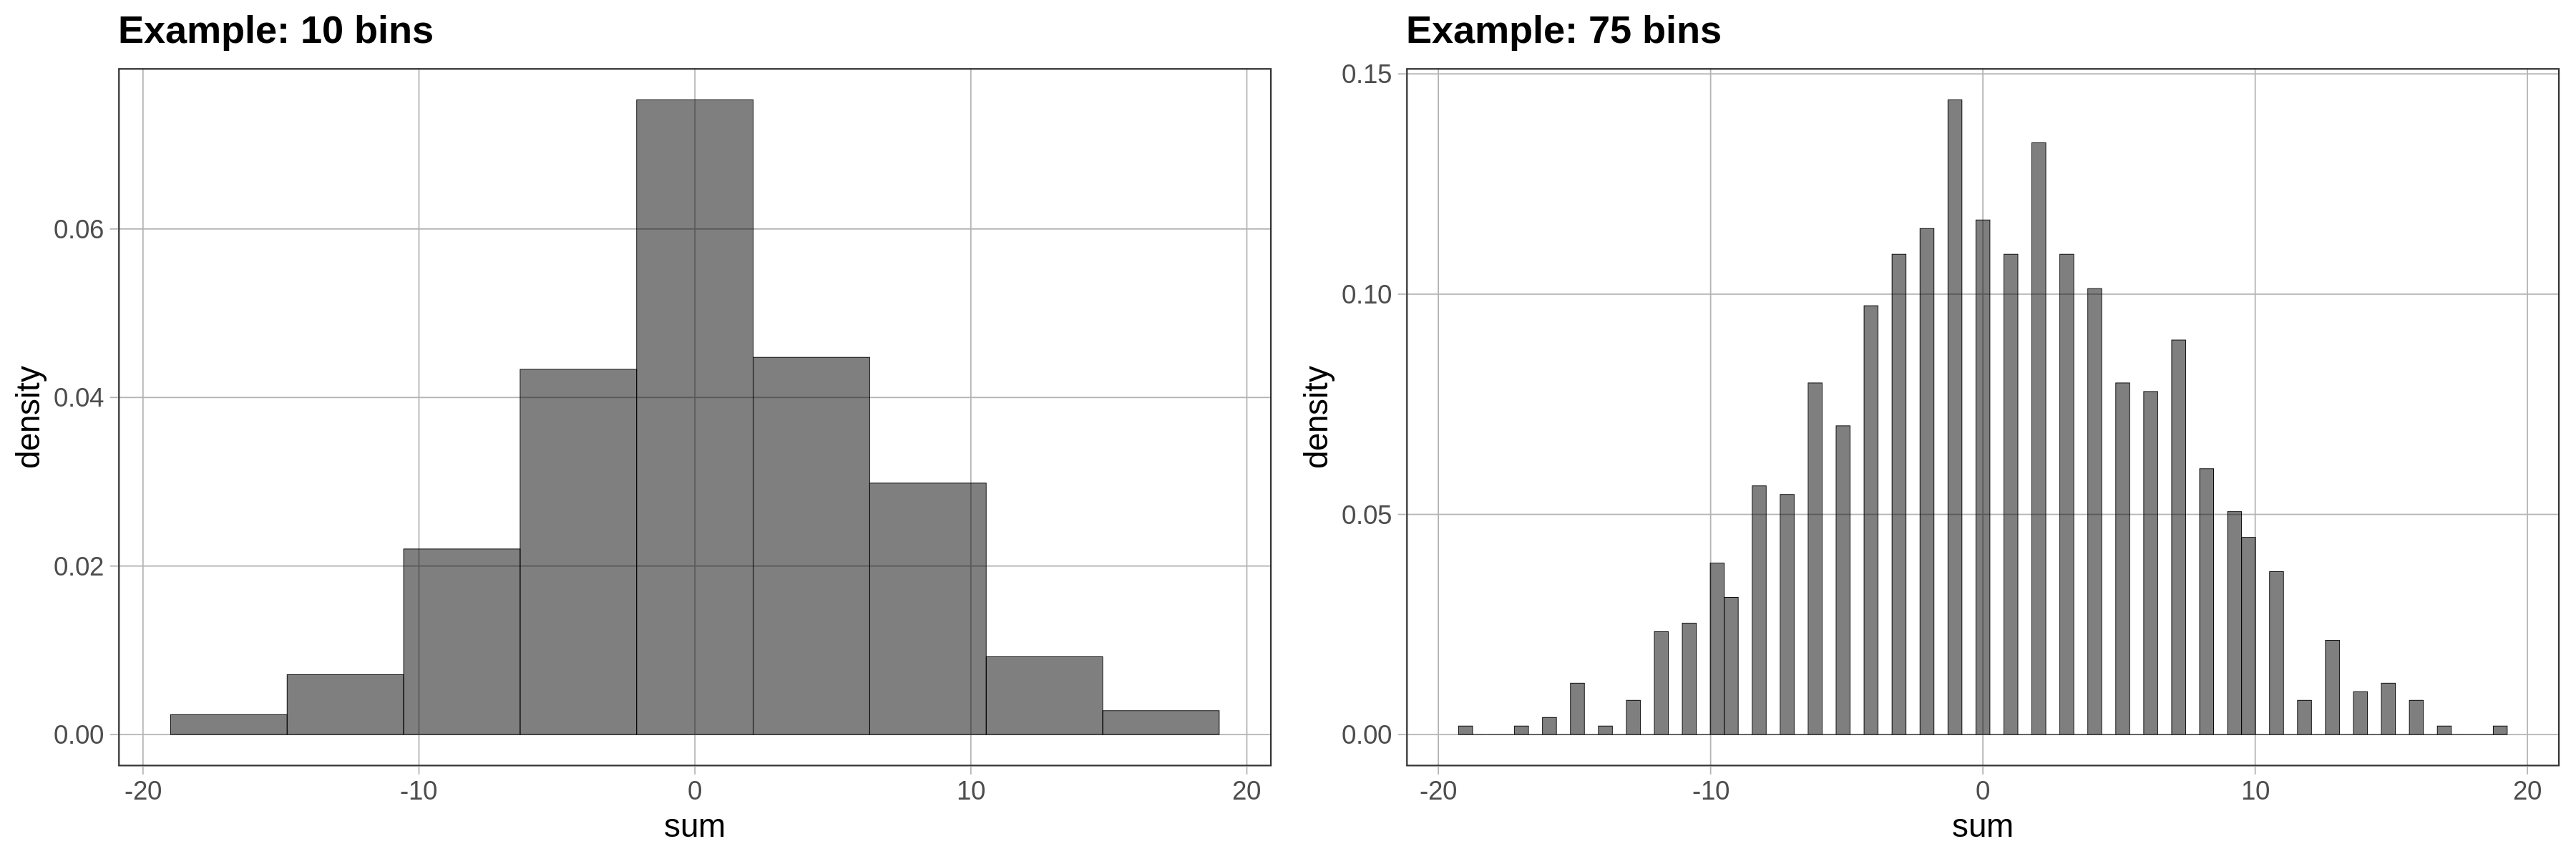 A density histogram of the distribution of sum in somedata with 10 bins on the left. There’s no gap between the bins. Another density histogram of the distribution of sum in somedata with 75 bins on the right. There are gaps between the bins.